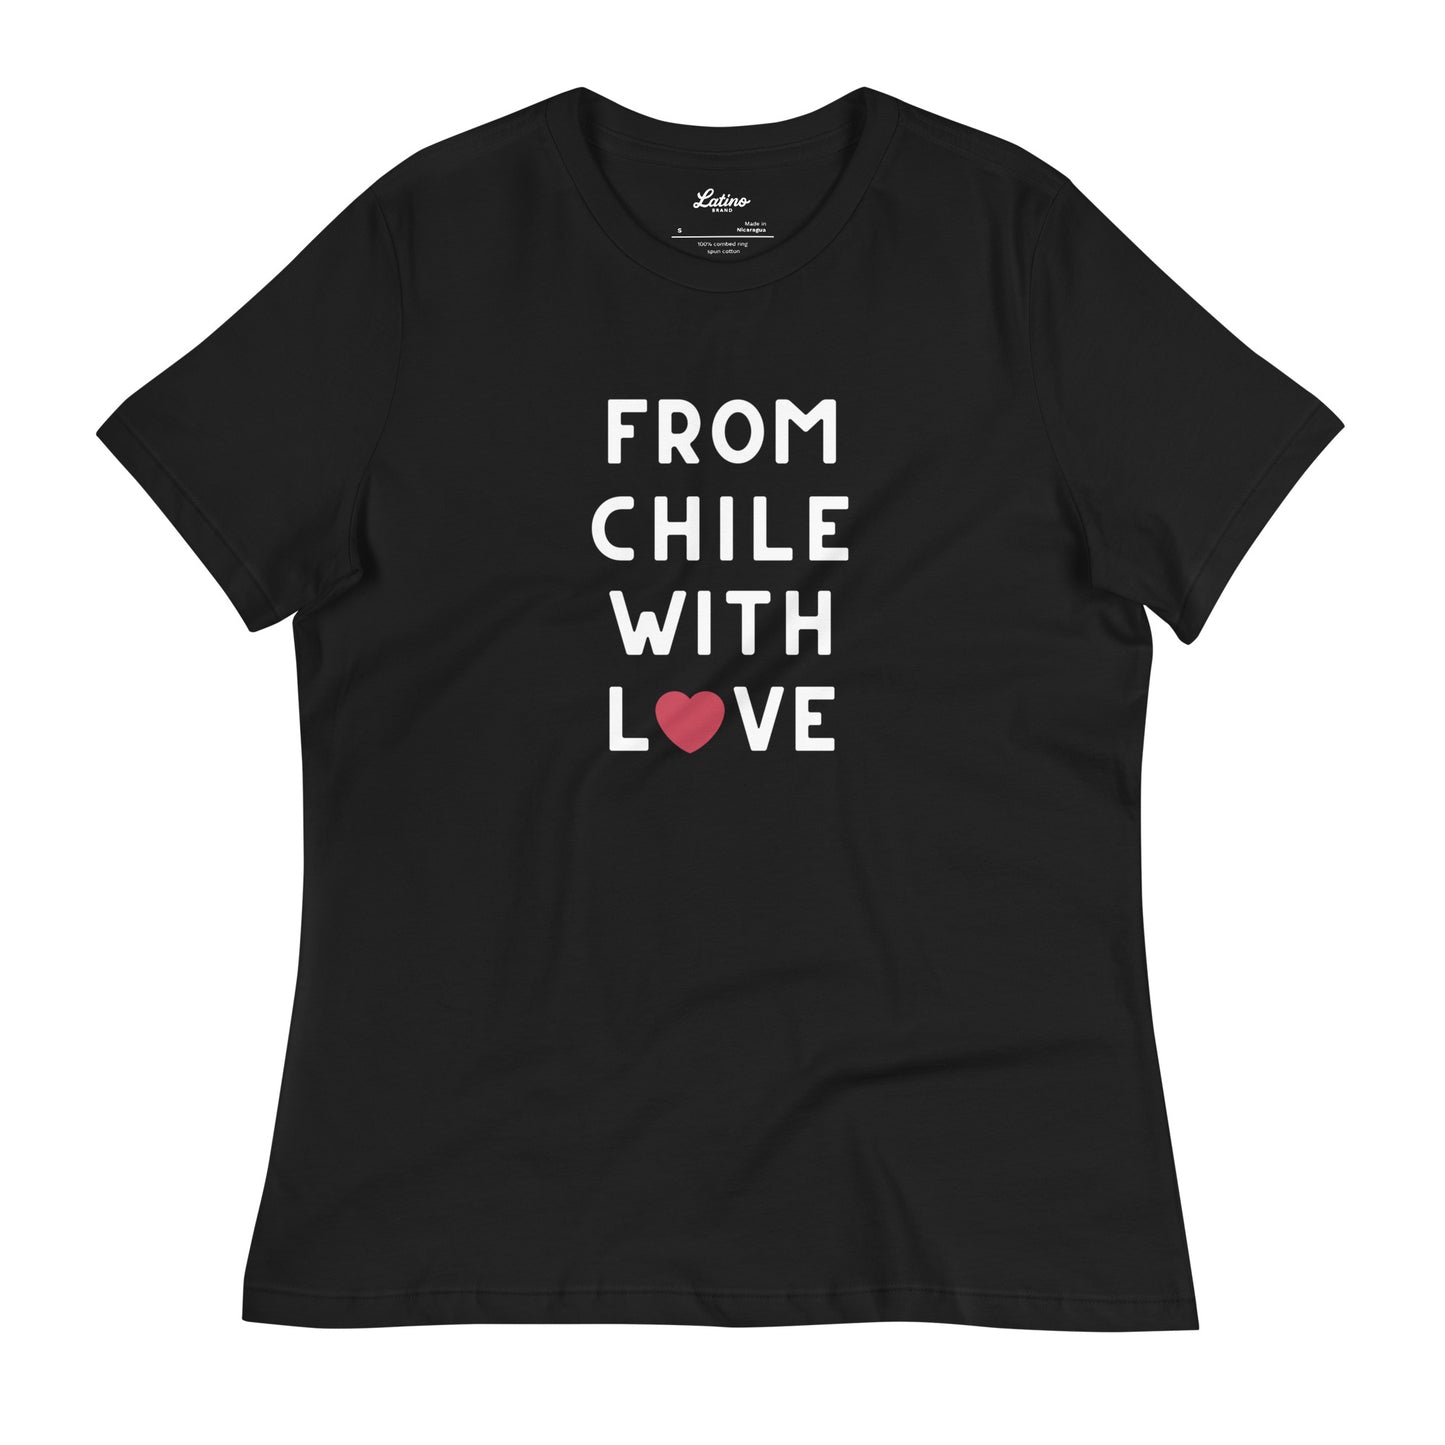 🇨🇱 From Chile With Love (Women)